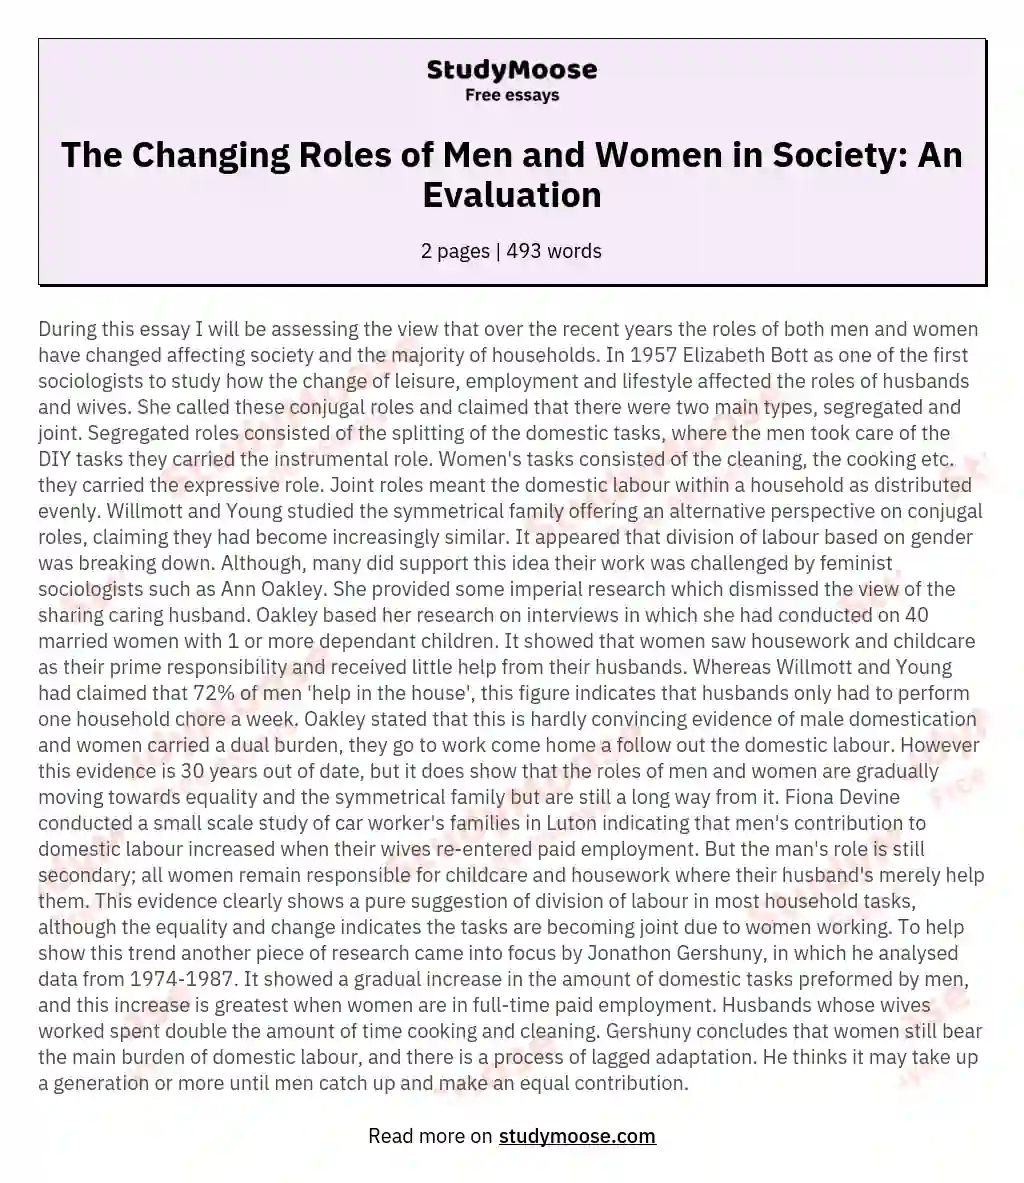 The Changing Roles of Men and Women in Society: An Evaluation essay